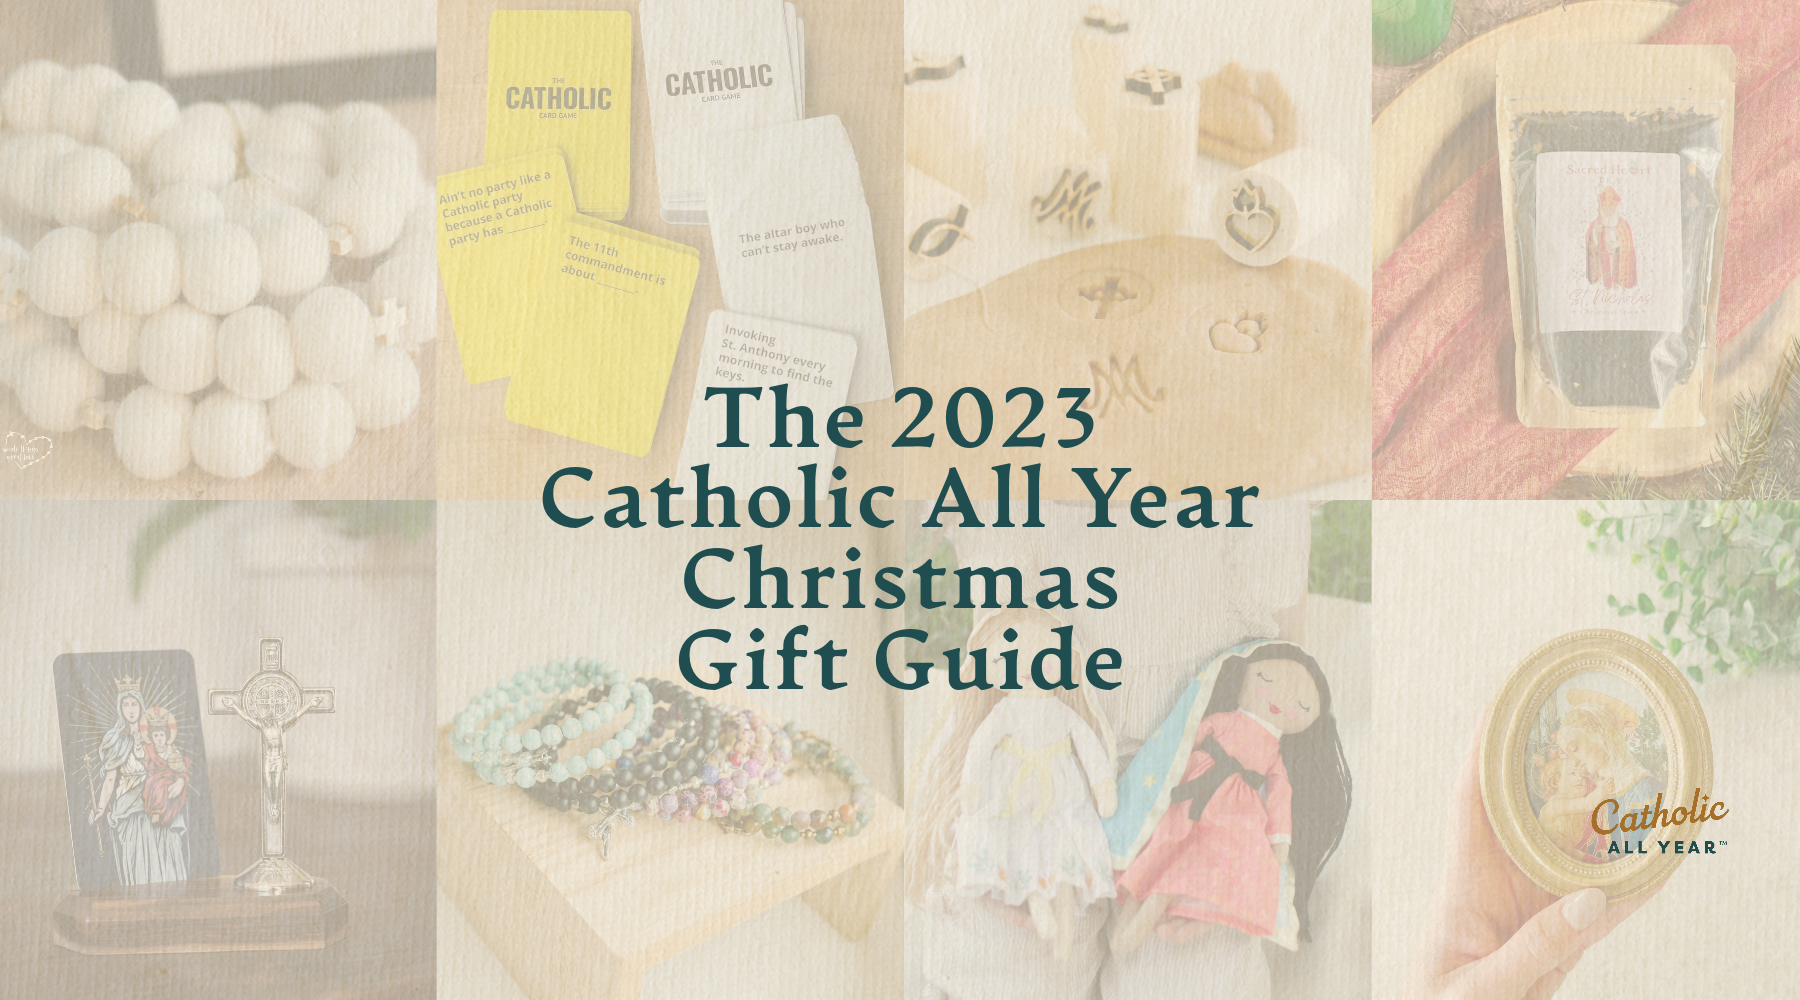 The Catholic All Year at Home, -Free, Catholic Gift Guide for a Very  Unusual Easter - Catholic All Year